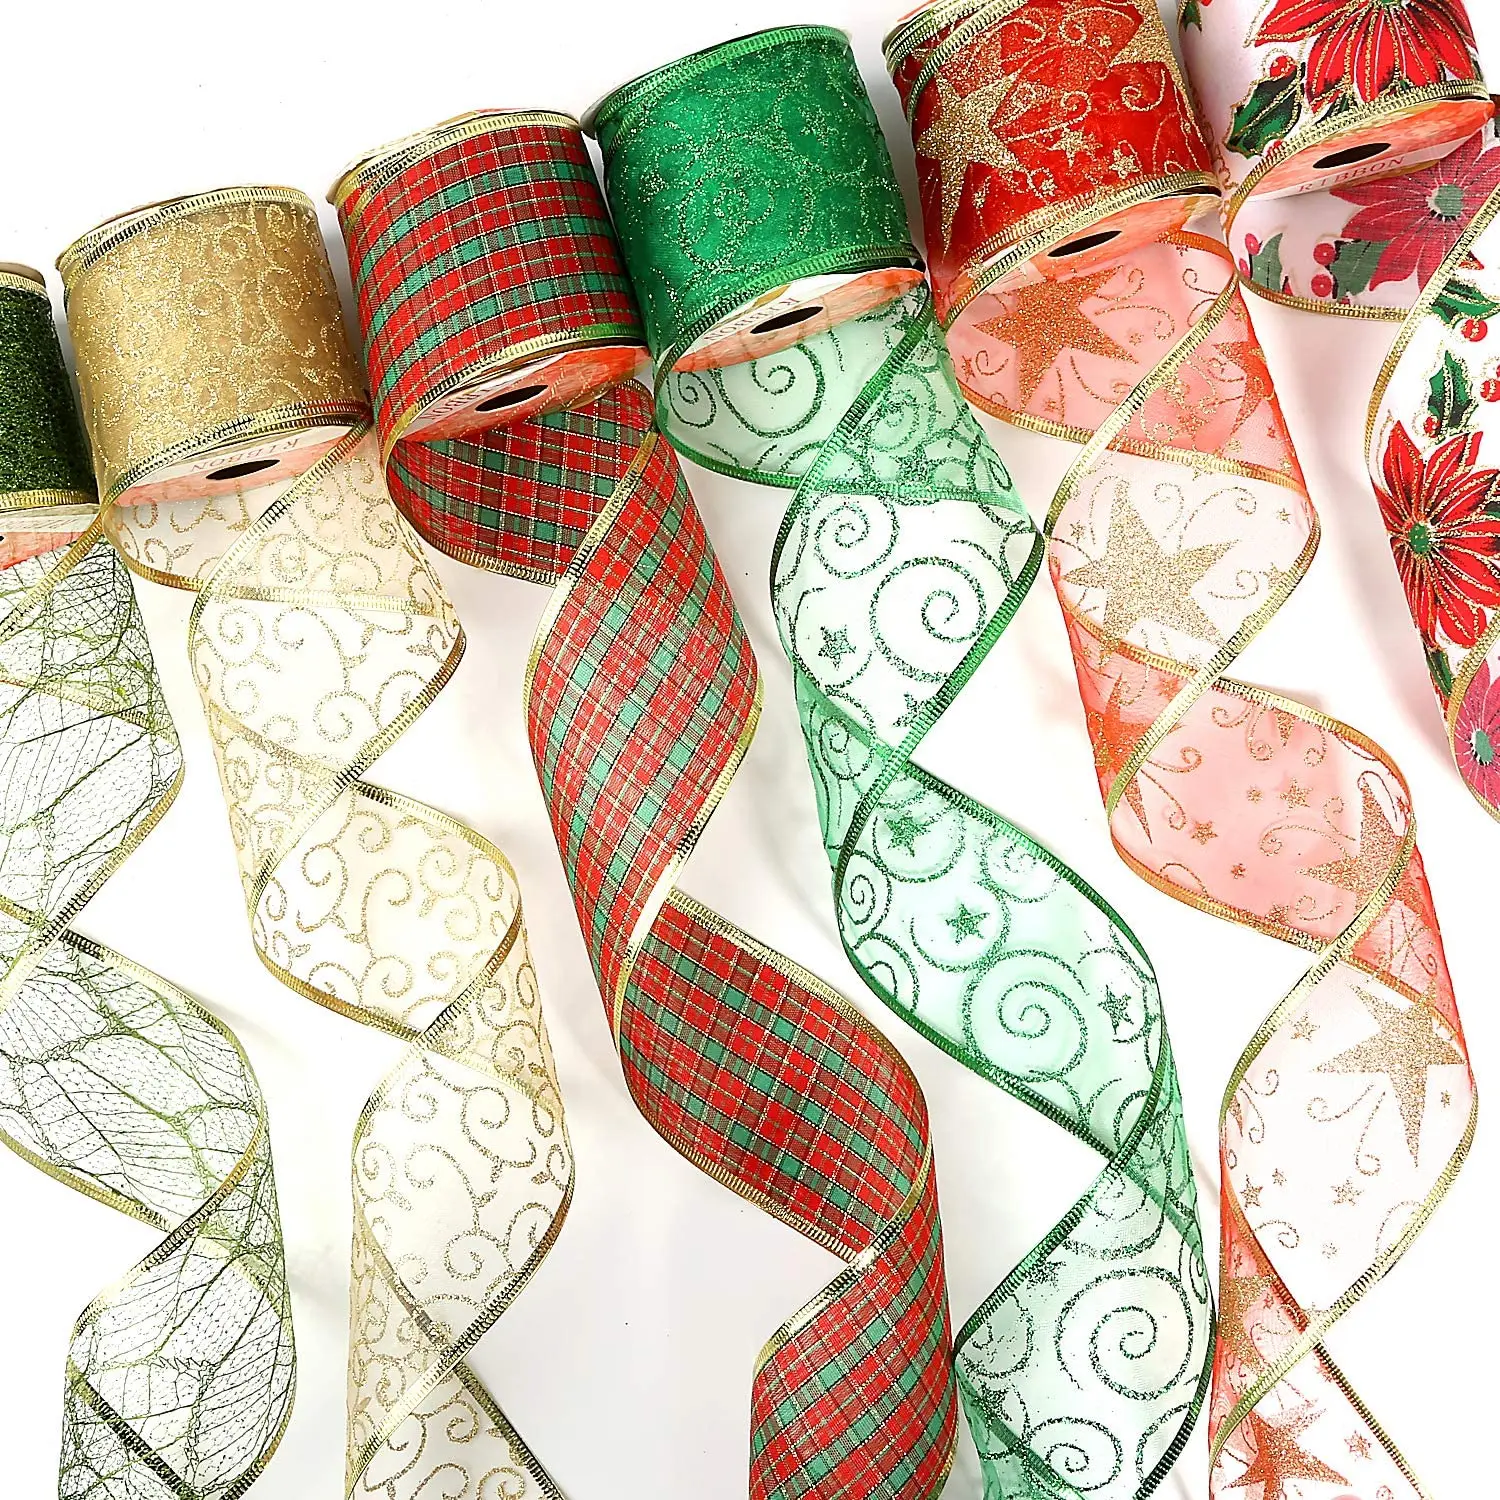 BS Pack and sell Christmas Wired Ribbon Assorted Plaid Sparkling Decorations Wired Sheer Glitter Tulle Ribbon 36 Yards